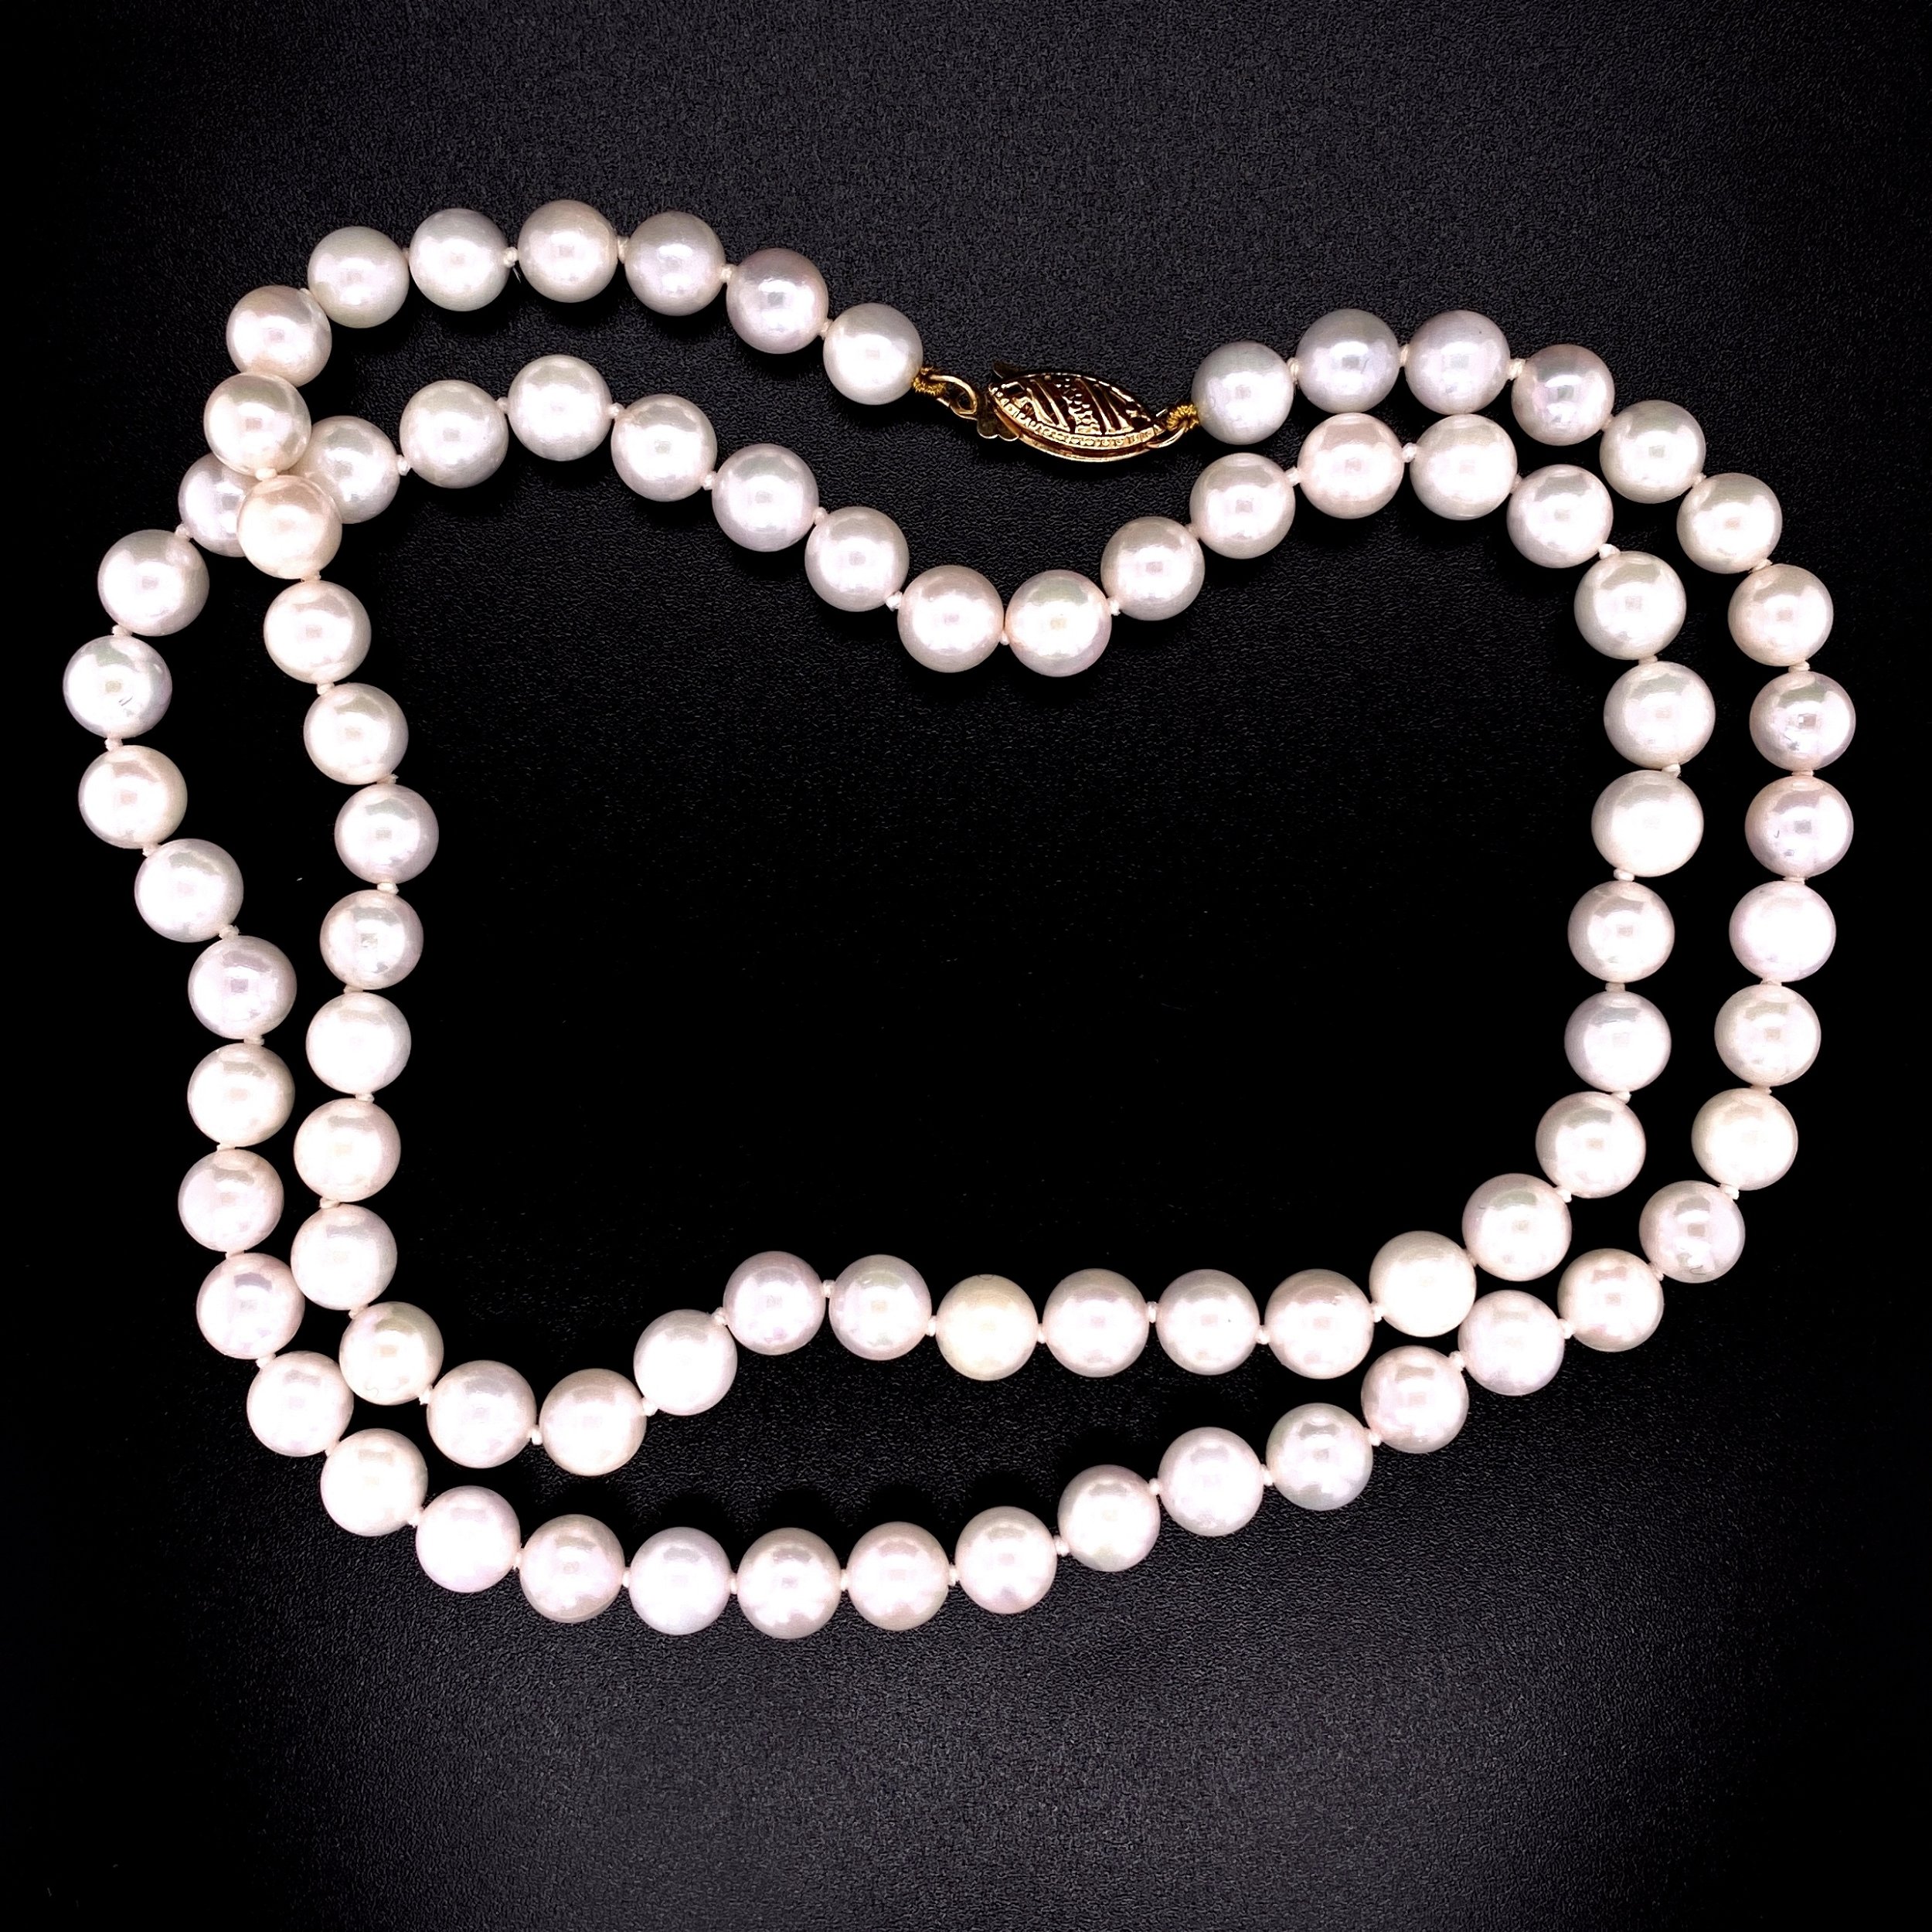 14K YG 6.5mm Freshwater Pearl Necklace Strand 21"